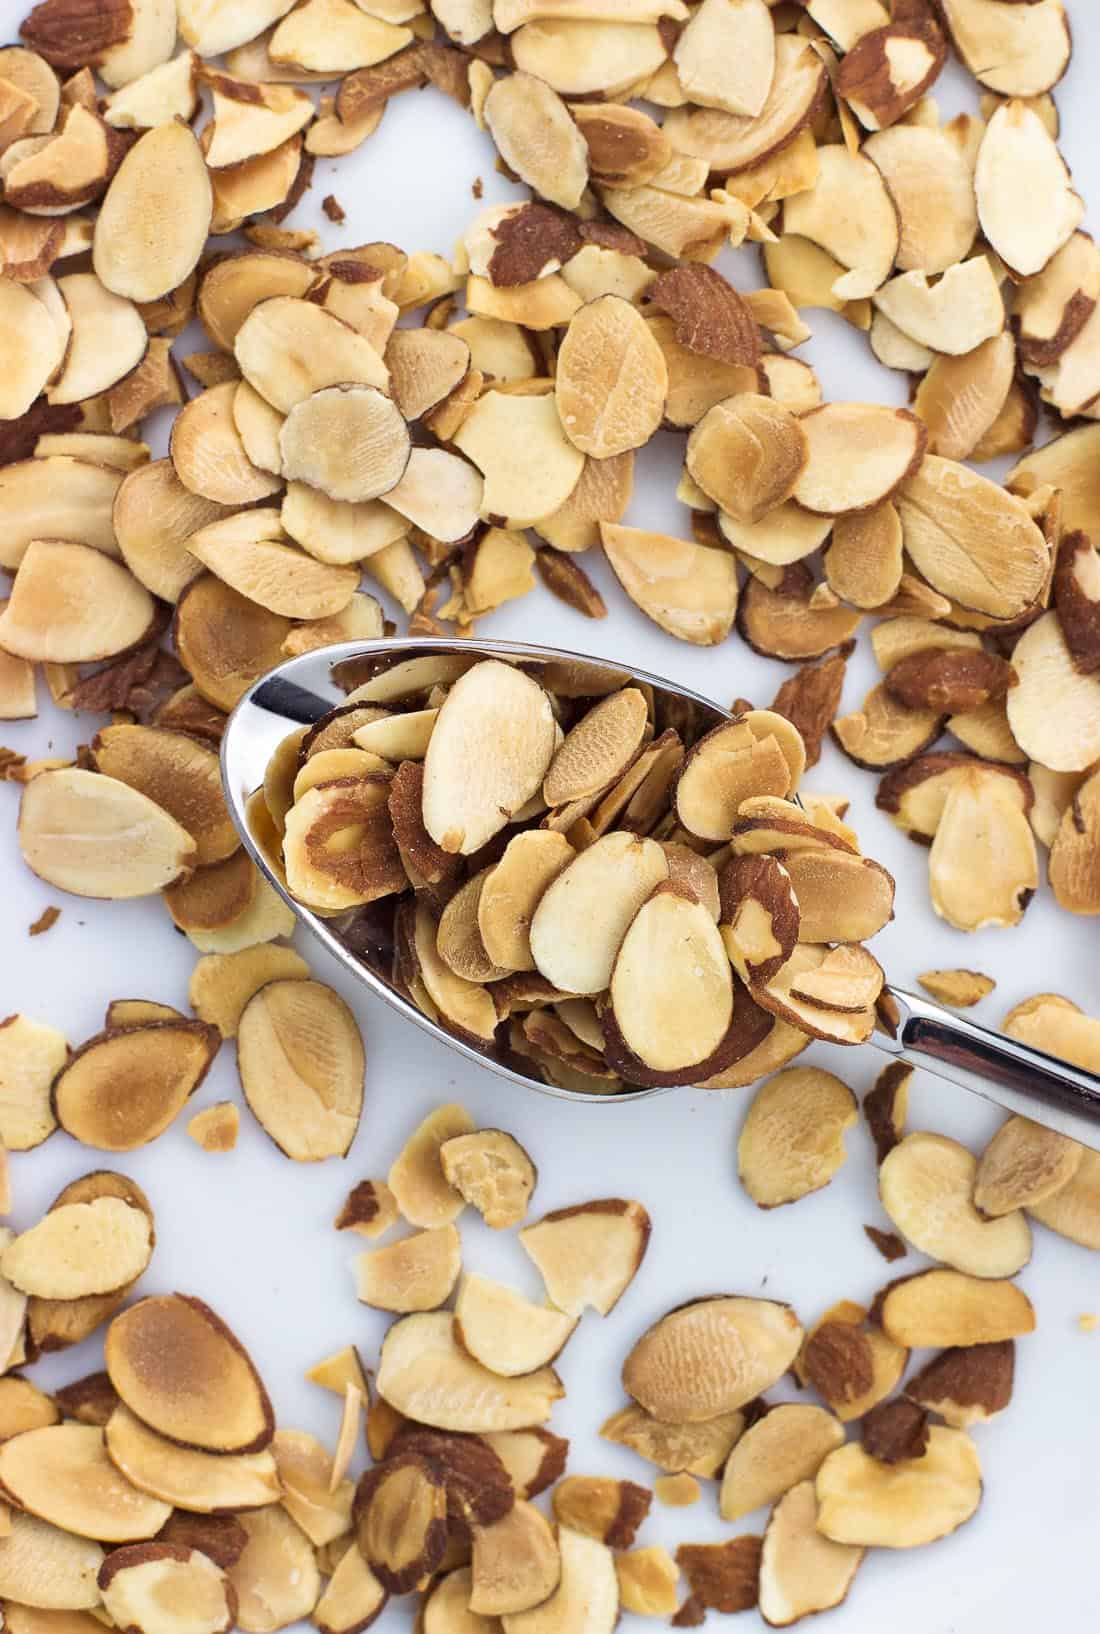 Toasted almond slices on a plate with a spoon